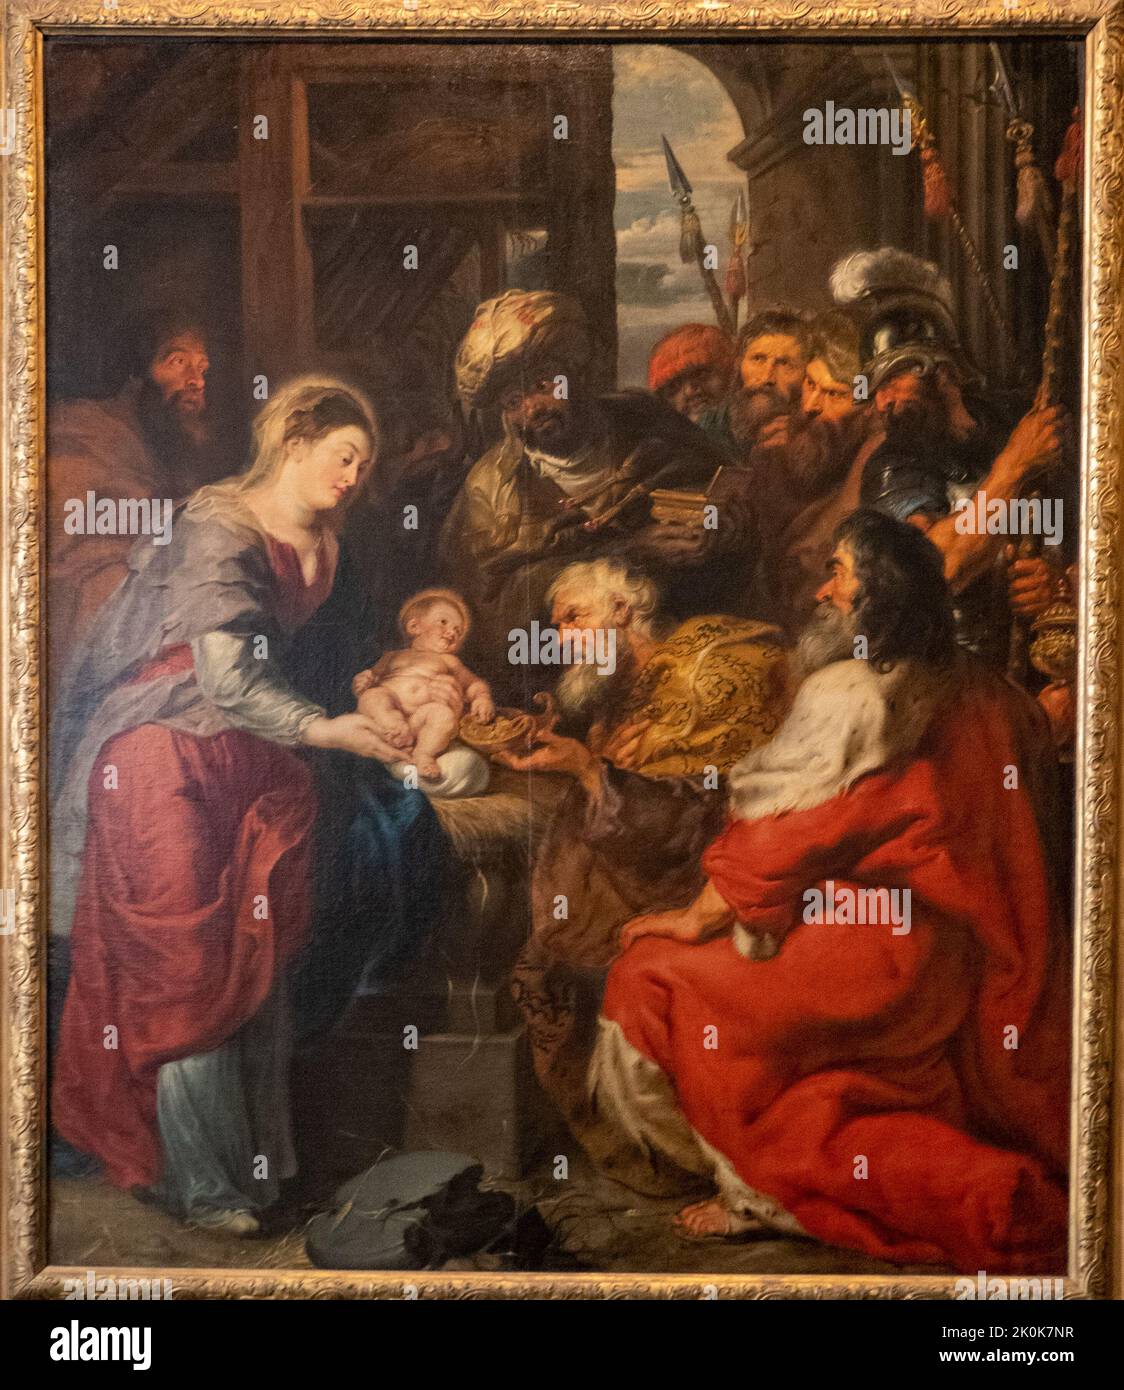 The adoration of the magi by Peter Paul Rubens, 1620 Stock Photo